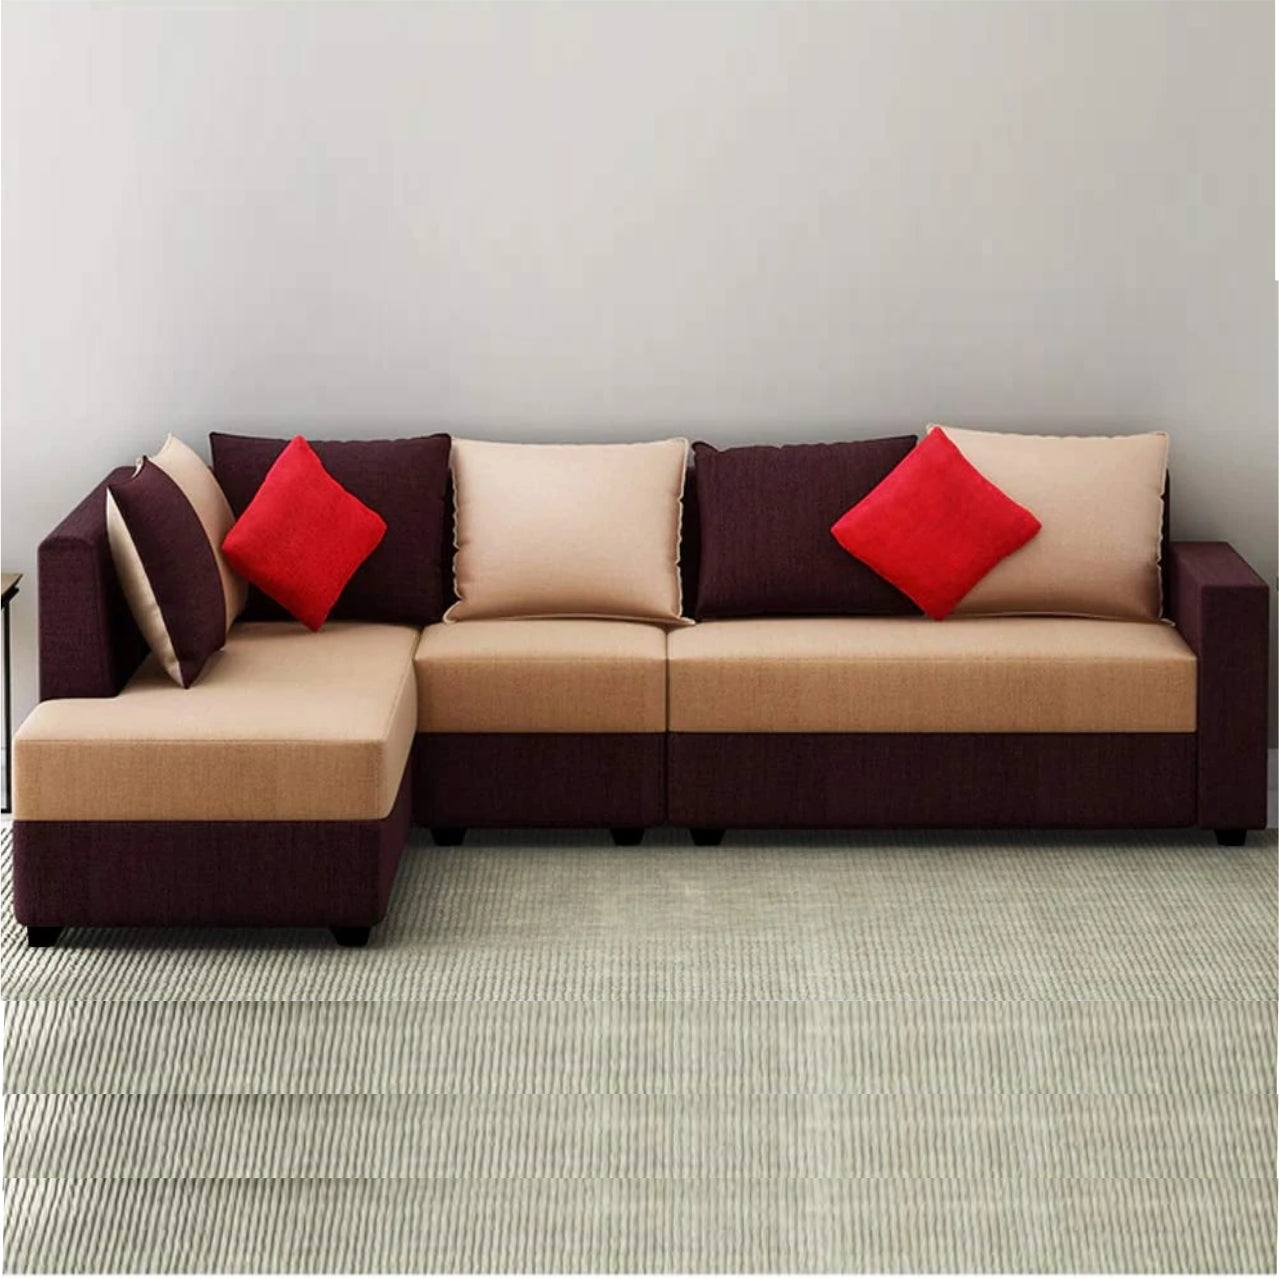 L Shape Sofa Set- Six Seaterwith Polyester Fabric Sofa Set - LHS  (Camel - Brown)